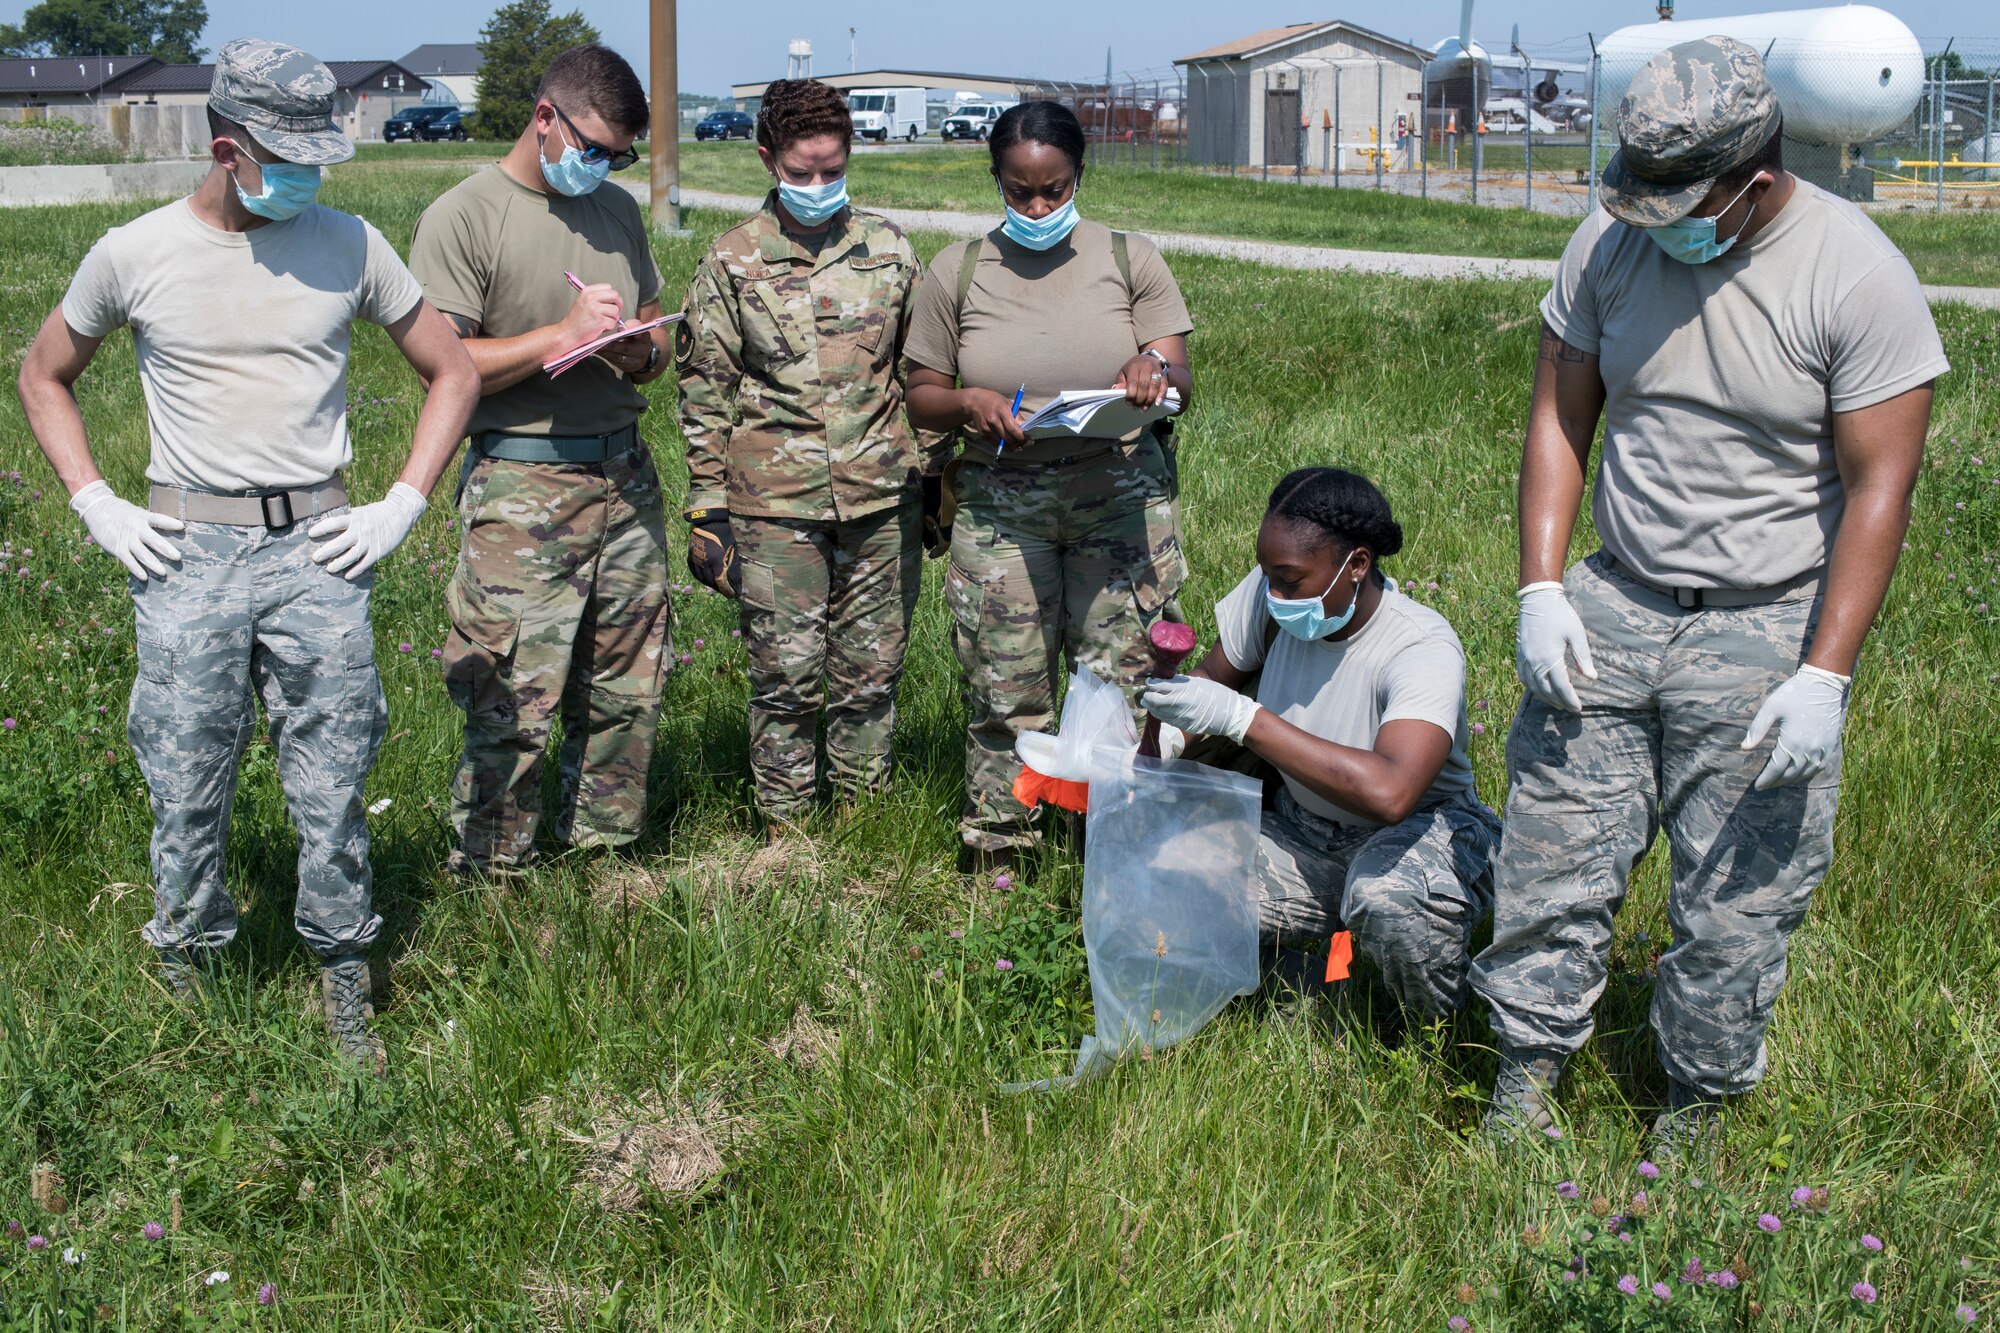 Airmen from the 436th Force Support Squadron conduct a search during a search-and-recovery exercise June 28, 2019, at Dover Air Force Base, Del. After a team member would locate an item, the team would stop, tag, photograph and log the item. (U.S. Air Force photo by Senior Airman Christopher Quail)